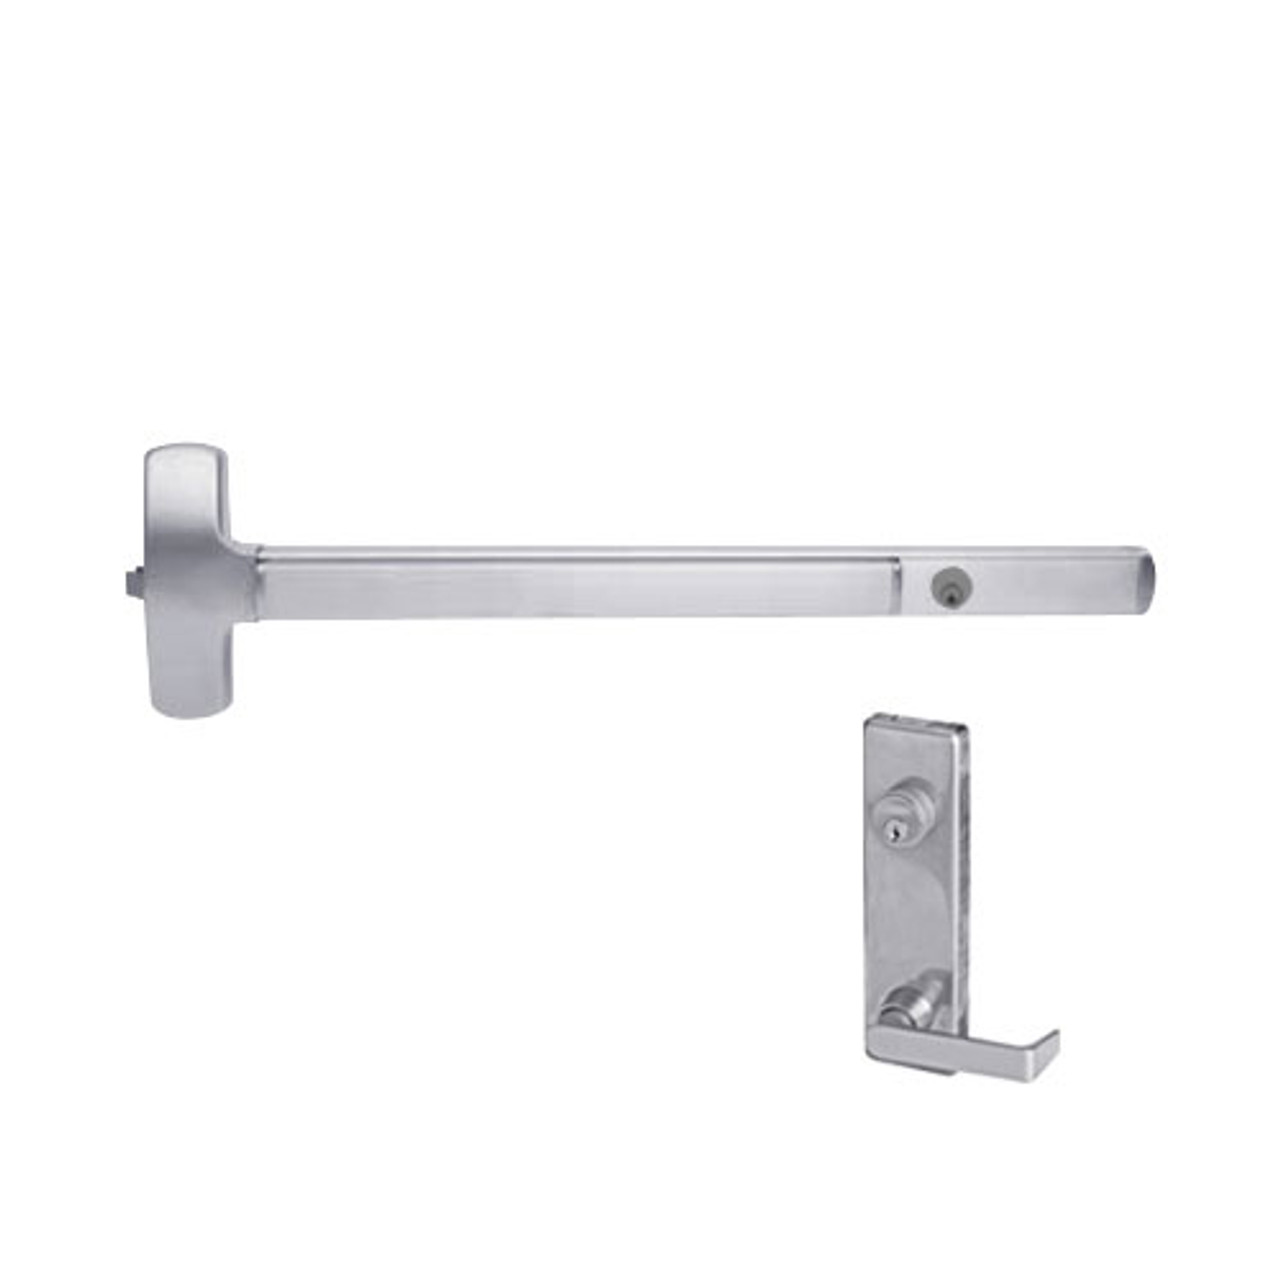 CD25-R-L-DANE-US32-4-LHR Falcon Exit Device in Polished Stainless Steel